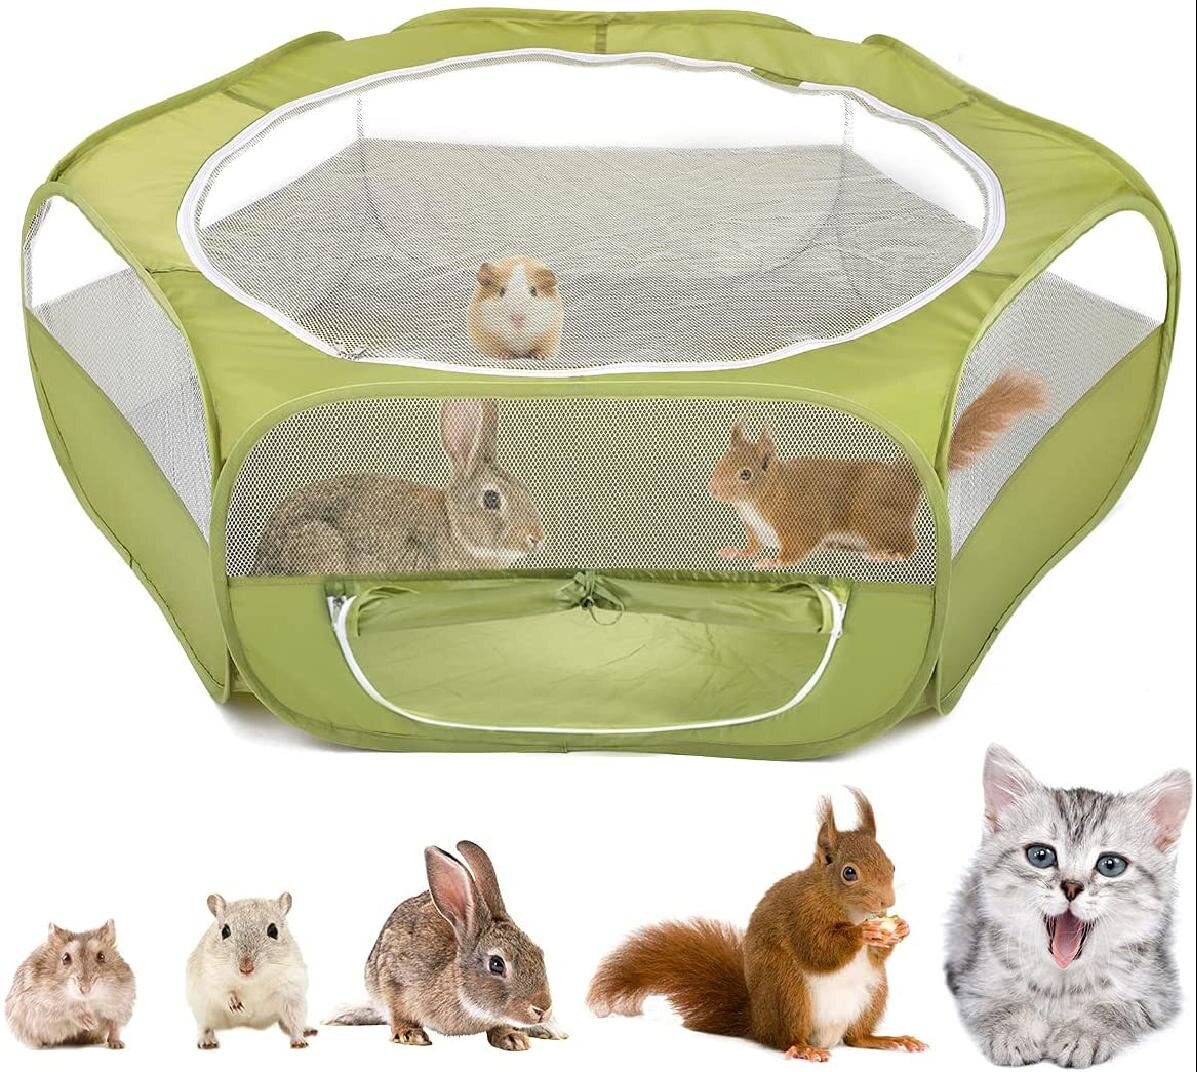 EUGAD Pet Playpen,Tall DIY Plastic Exercise Modular Enclosure Pet Run,Small Animals Cage as Guinea Pig Cage,Rabbit Hutch,Small Cat Run,Gerbil Cage,Hedgehog House,Indoor,8 Panels,Cable Ties Included